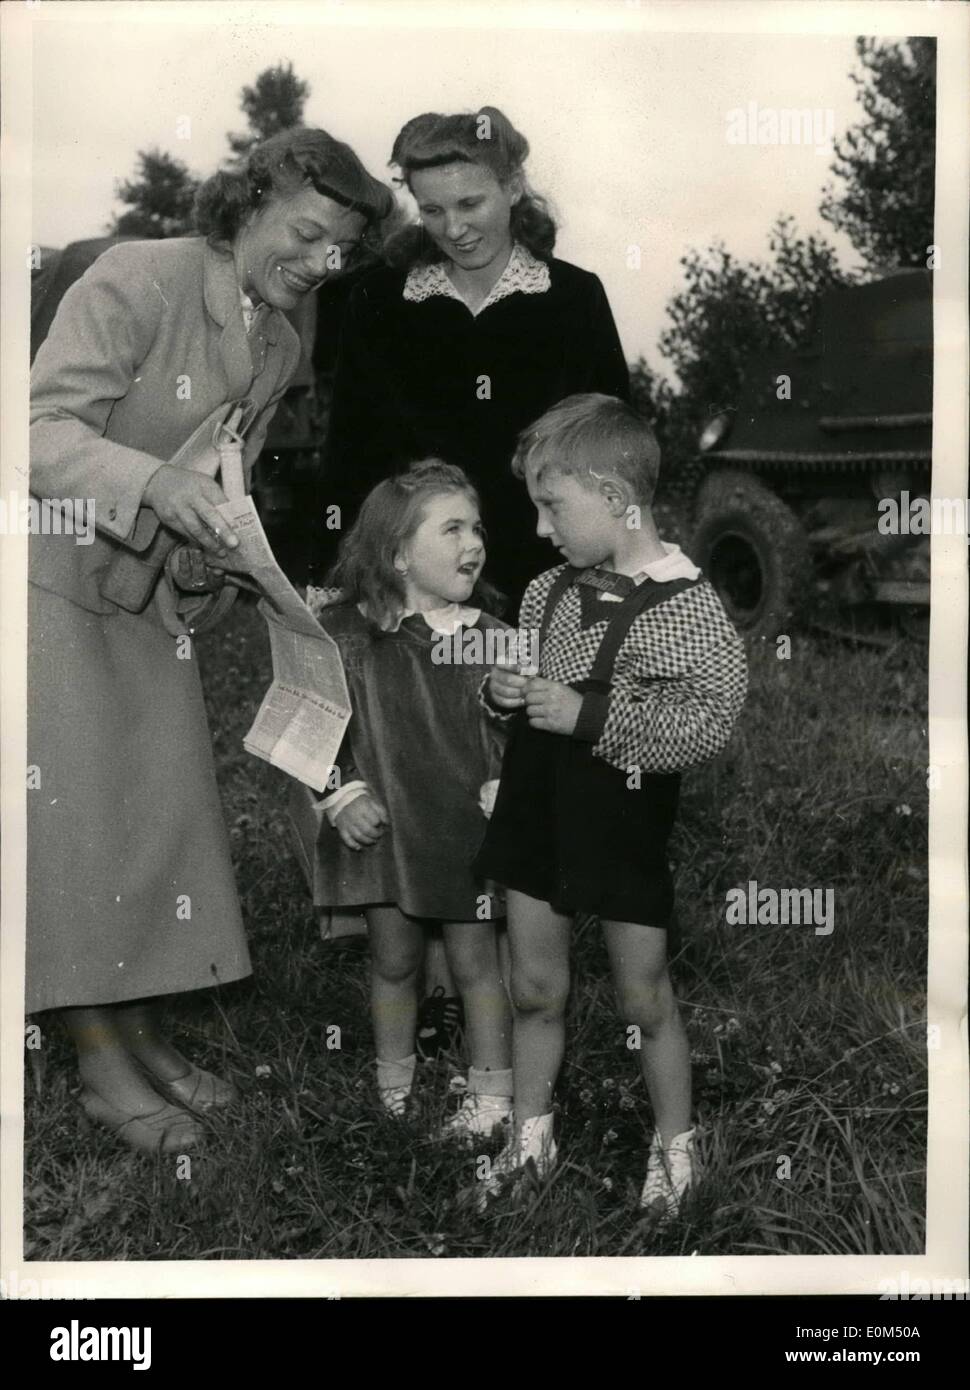 Jul. 07, 1953 - Czech refugees now given asylum - happily liberated. : Happily smiling after thorough army screening are the eight Czech refugees who crashed the Czech-German Border on 25 July 1953, at 0430 hours, at Haselbach, rural district Waldmuenchen (Bavarian Forest), Southern Germany. Photo shows Mrs. Cloude, Mrs. Uhlik and their two children. here they are seen studying the paper with the headlines reporting about their self-liberation. Exclusive. Stock Photo